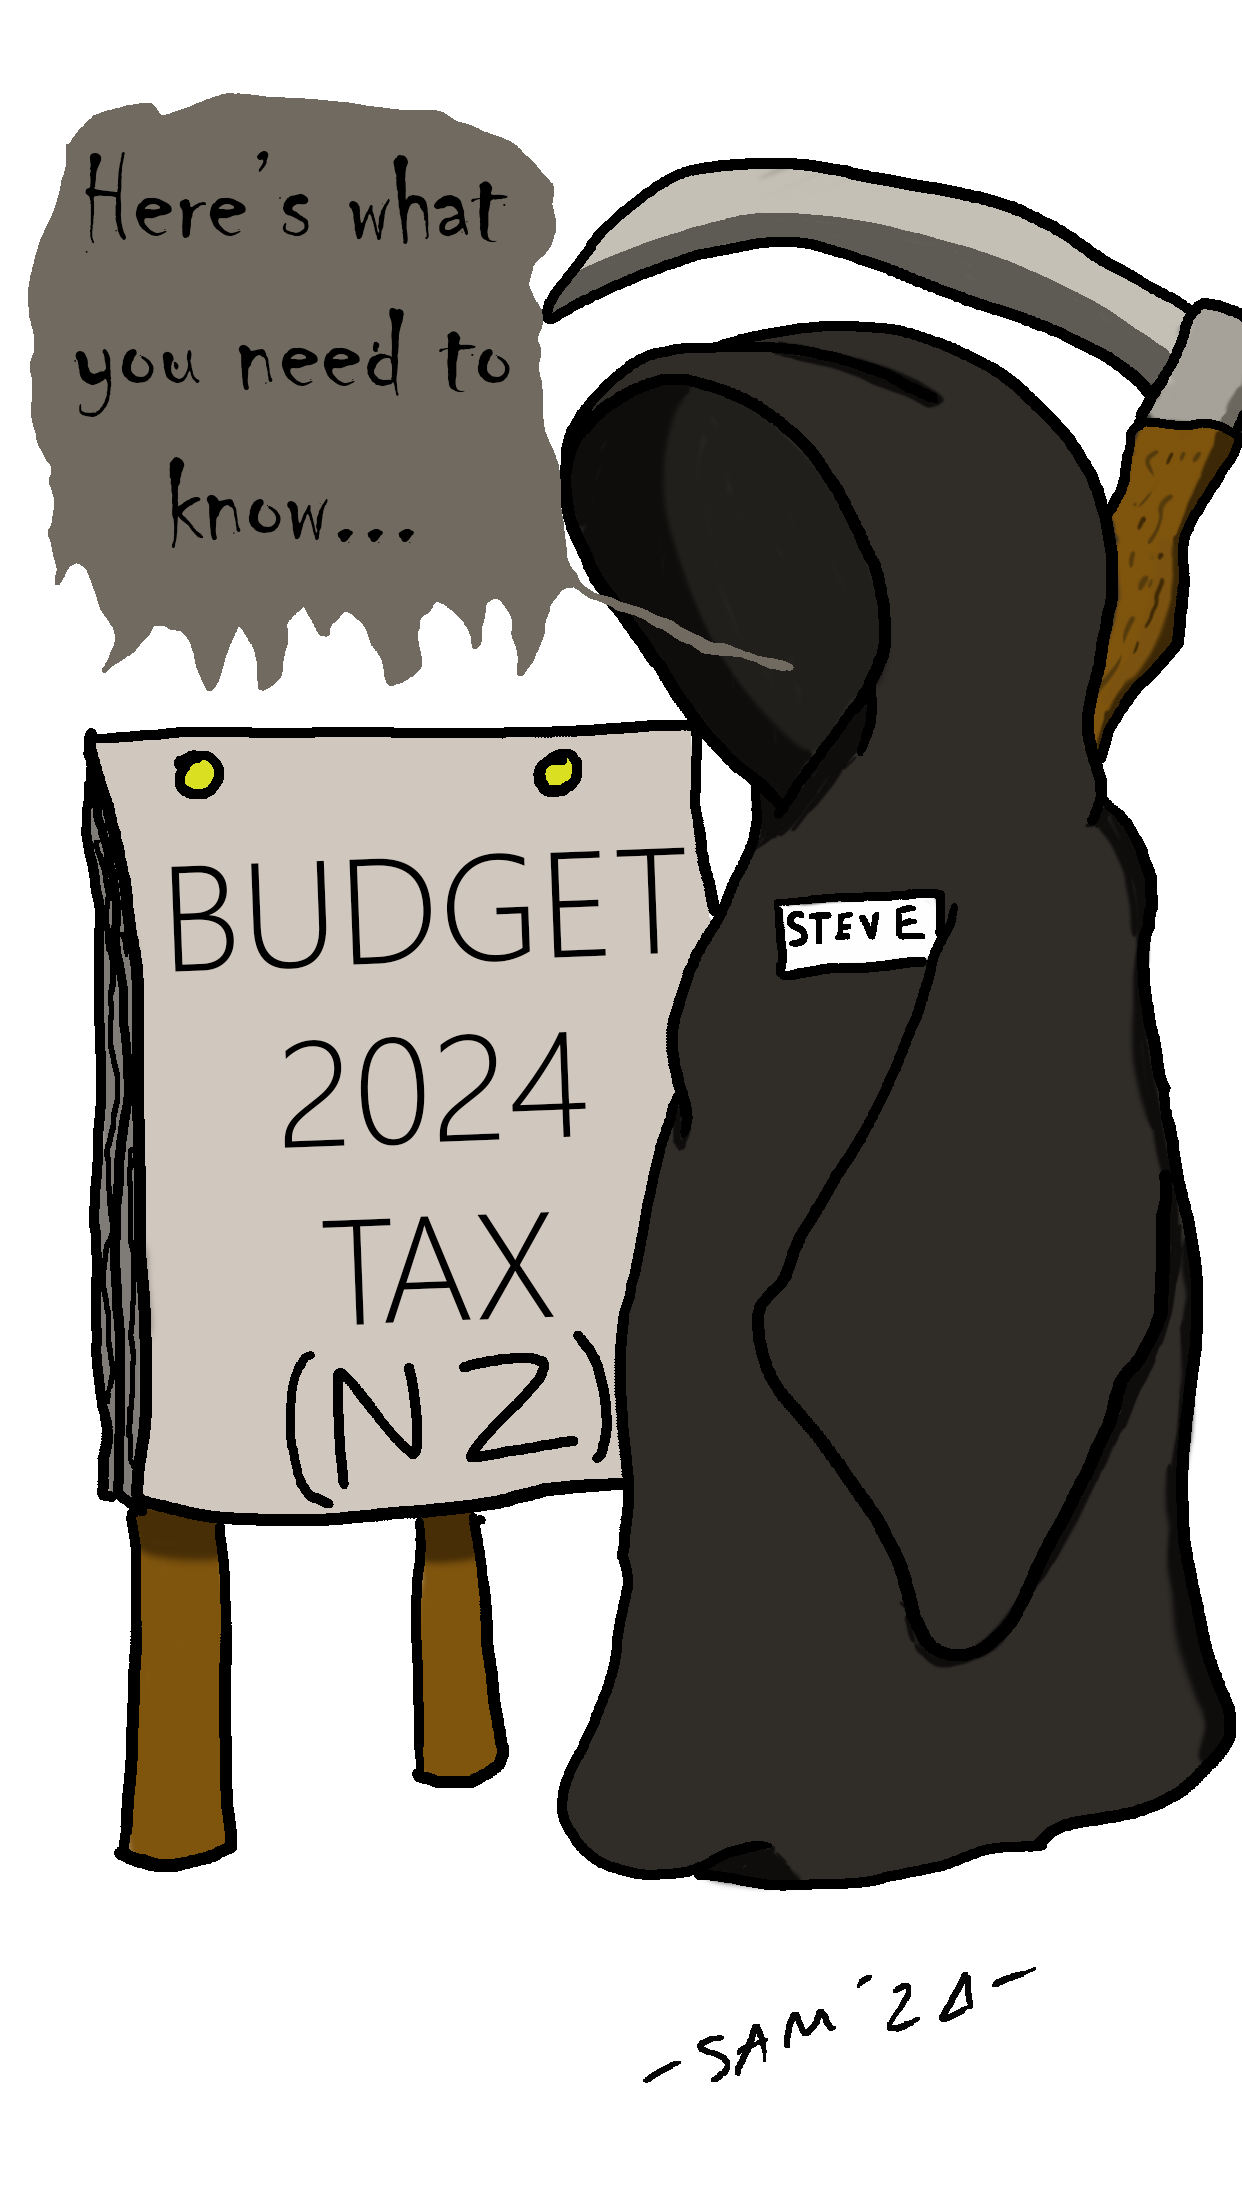 Budget 2024 Tax: How it affects you!